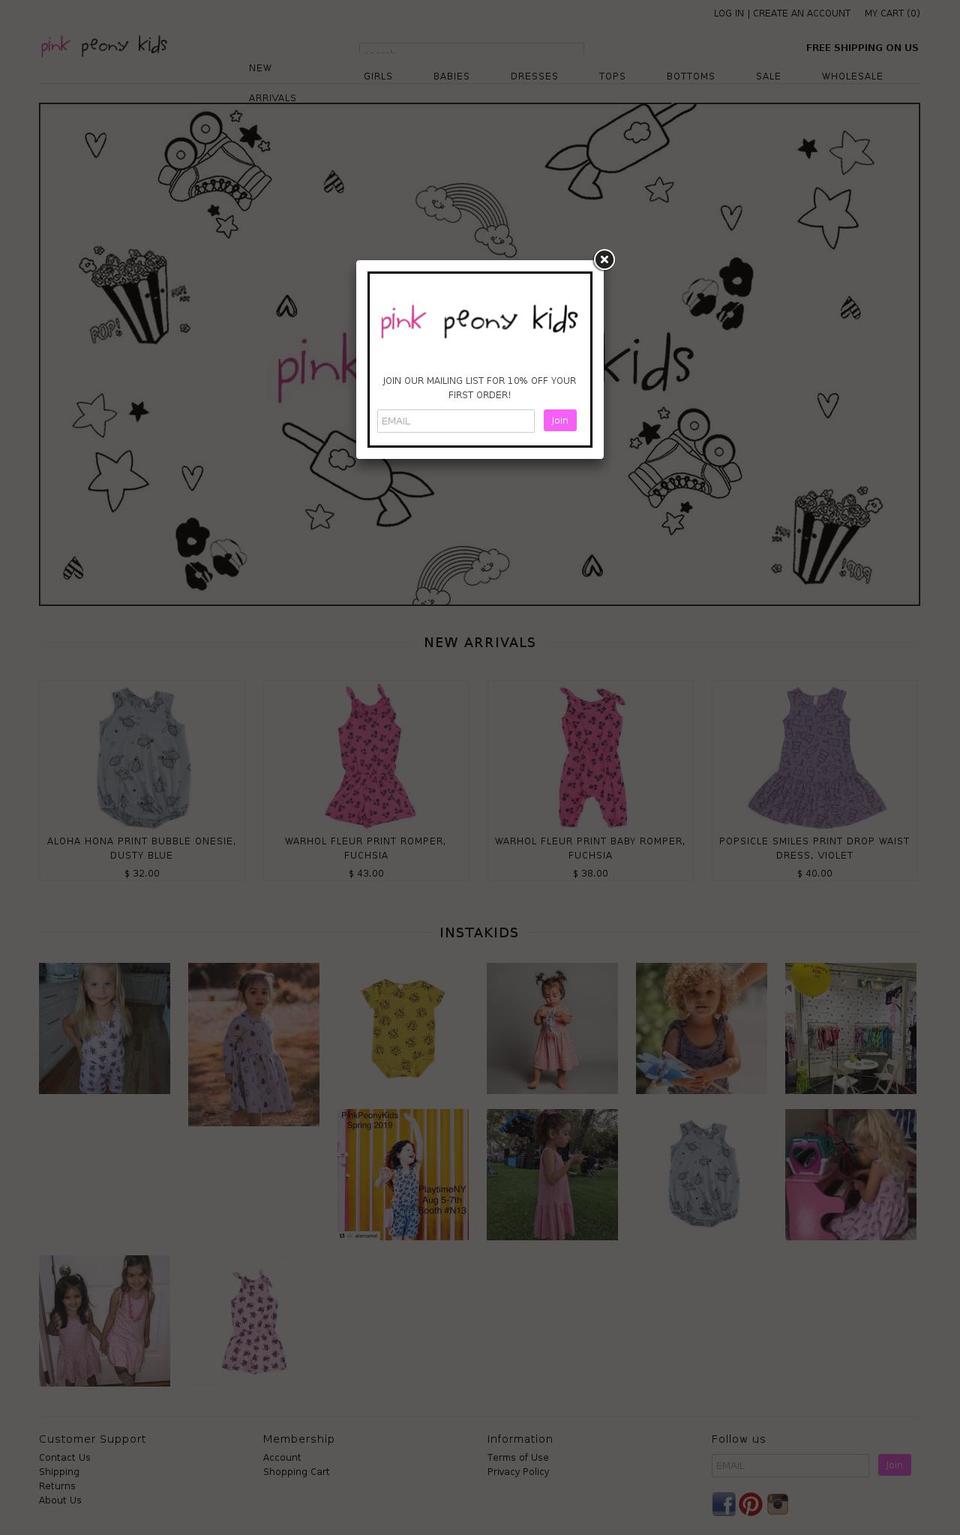 boutique Shopify theme site example pinkpeonykids.com